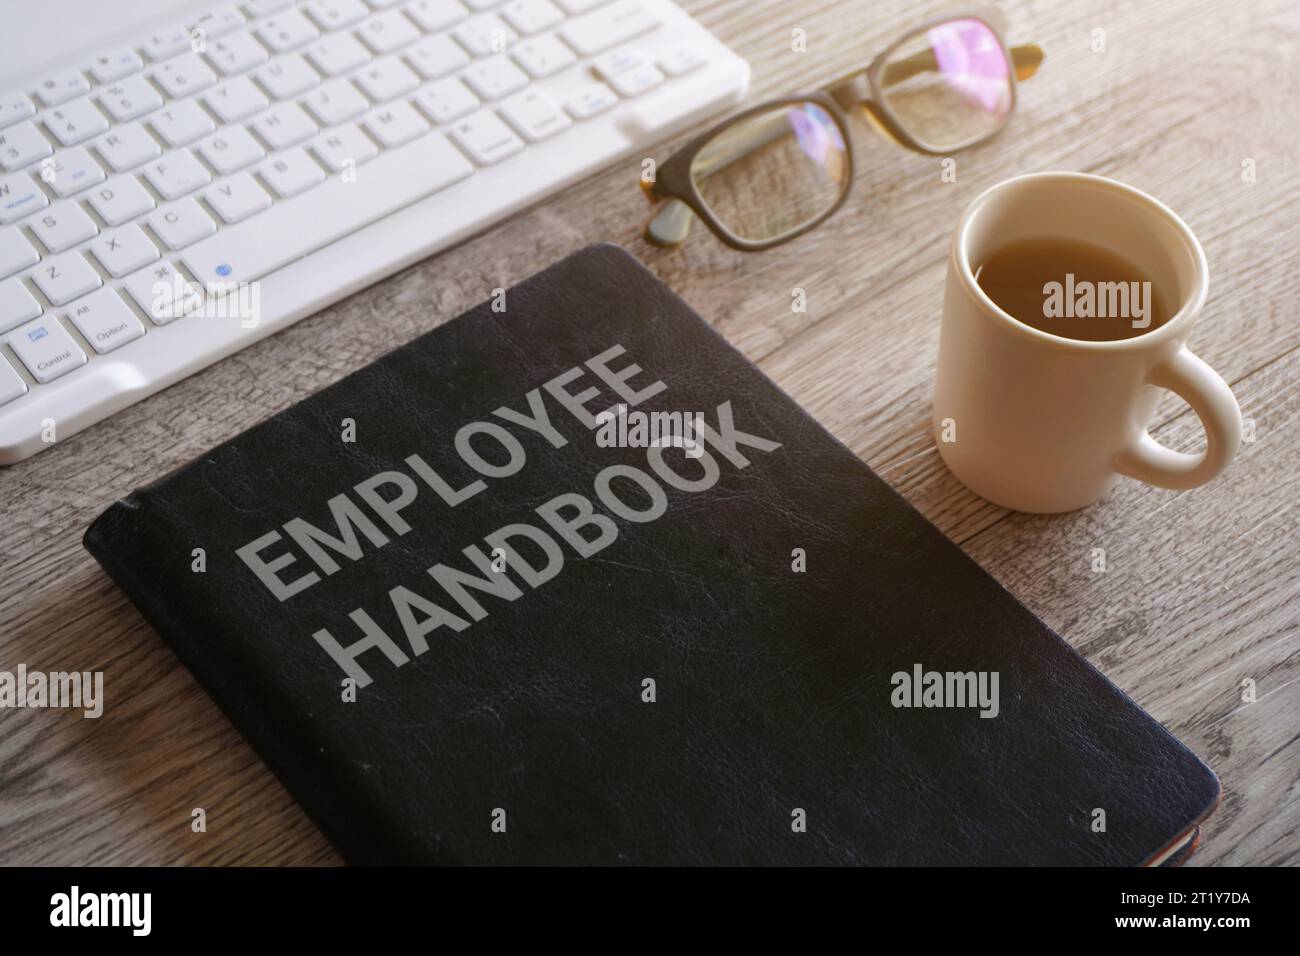 Closeup image of book with text EMPLOYEE HANDBOOK surrounded by cup of coffee and glasses on office desk Stock Photo